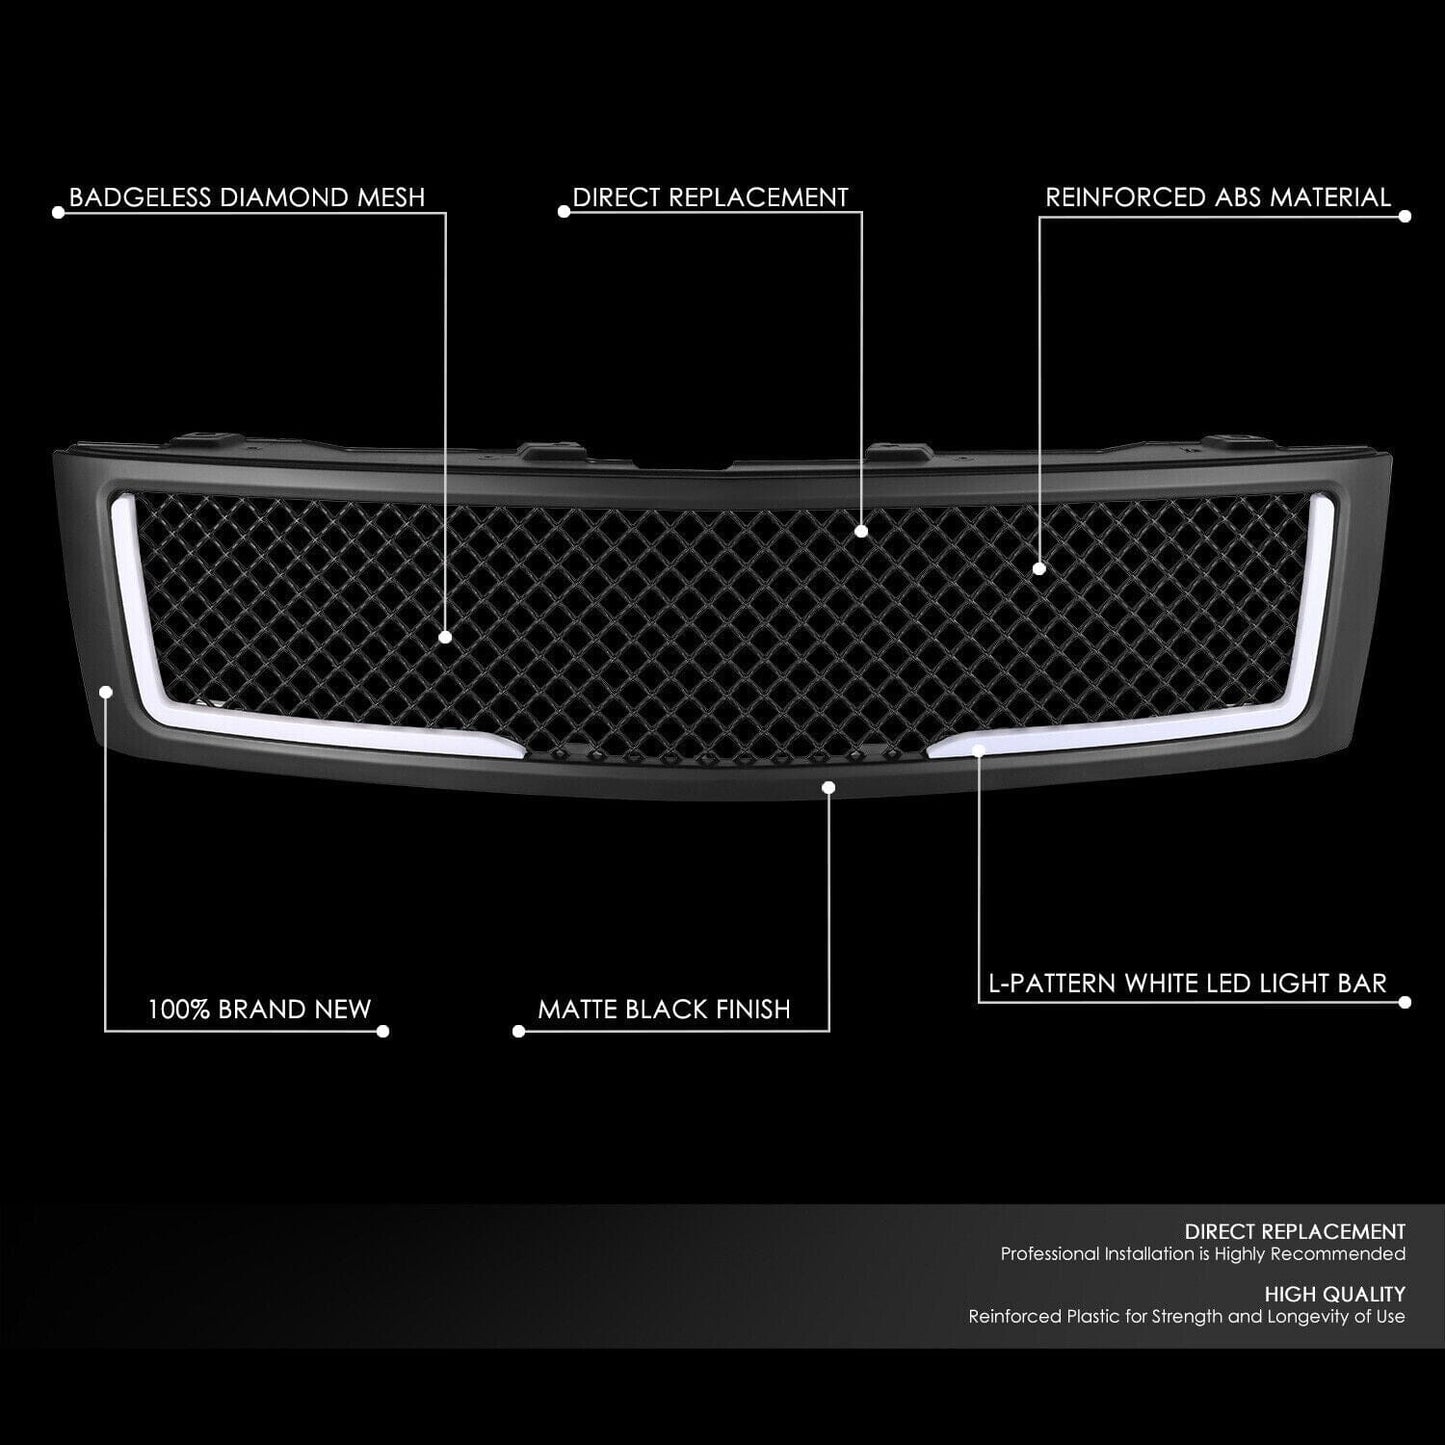 Mesh Grille w/ LED DRL Grille For 07-13 Chevy Silverado 1500